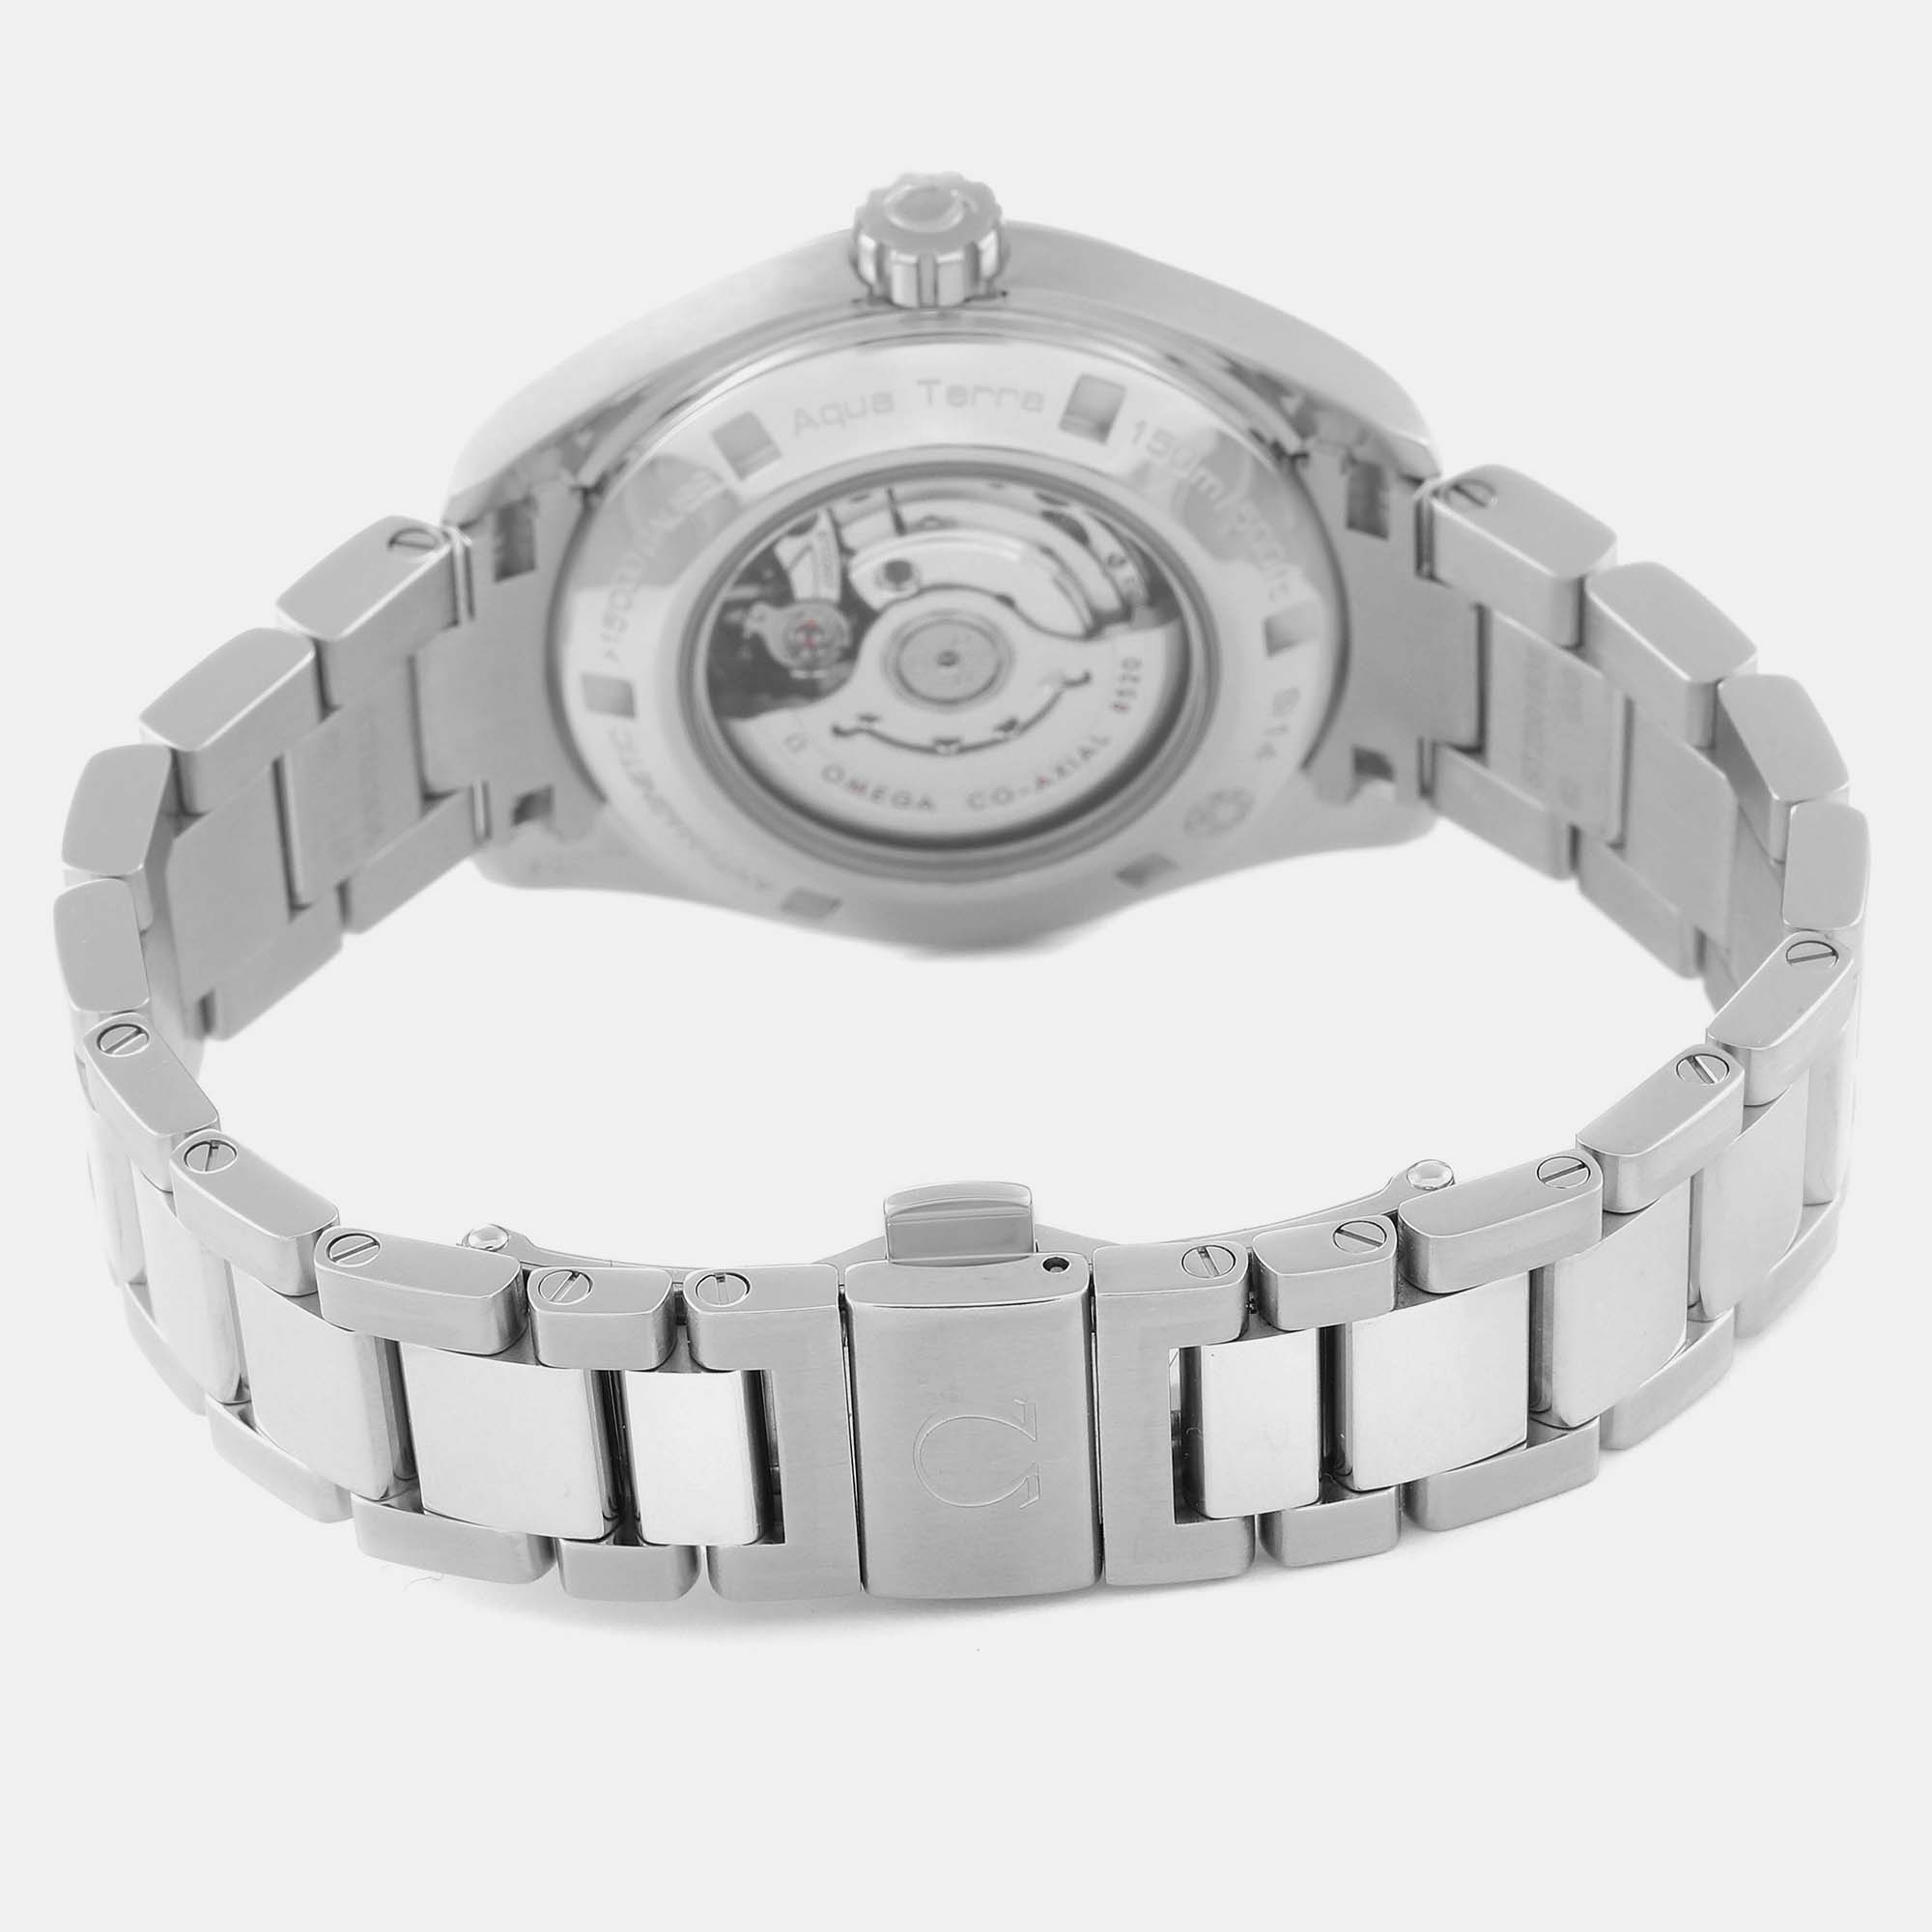 Omega Mother Of Pearl Diamond Stainless Steel Aqua Terra 231.10.34.20.57.001 Automatic Women's Wristwatch 34 Mm